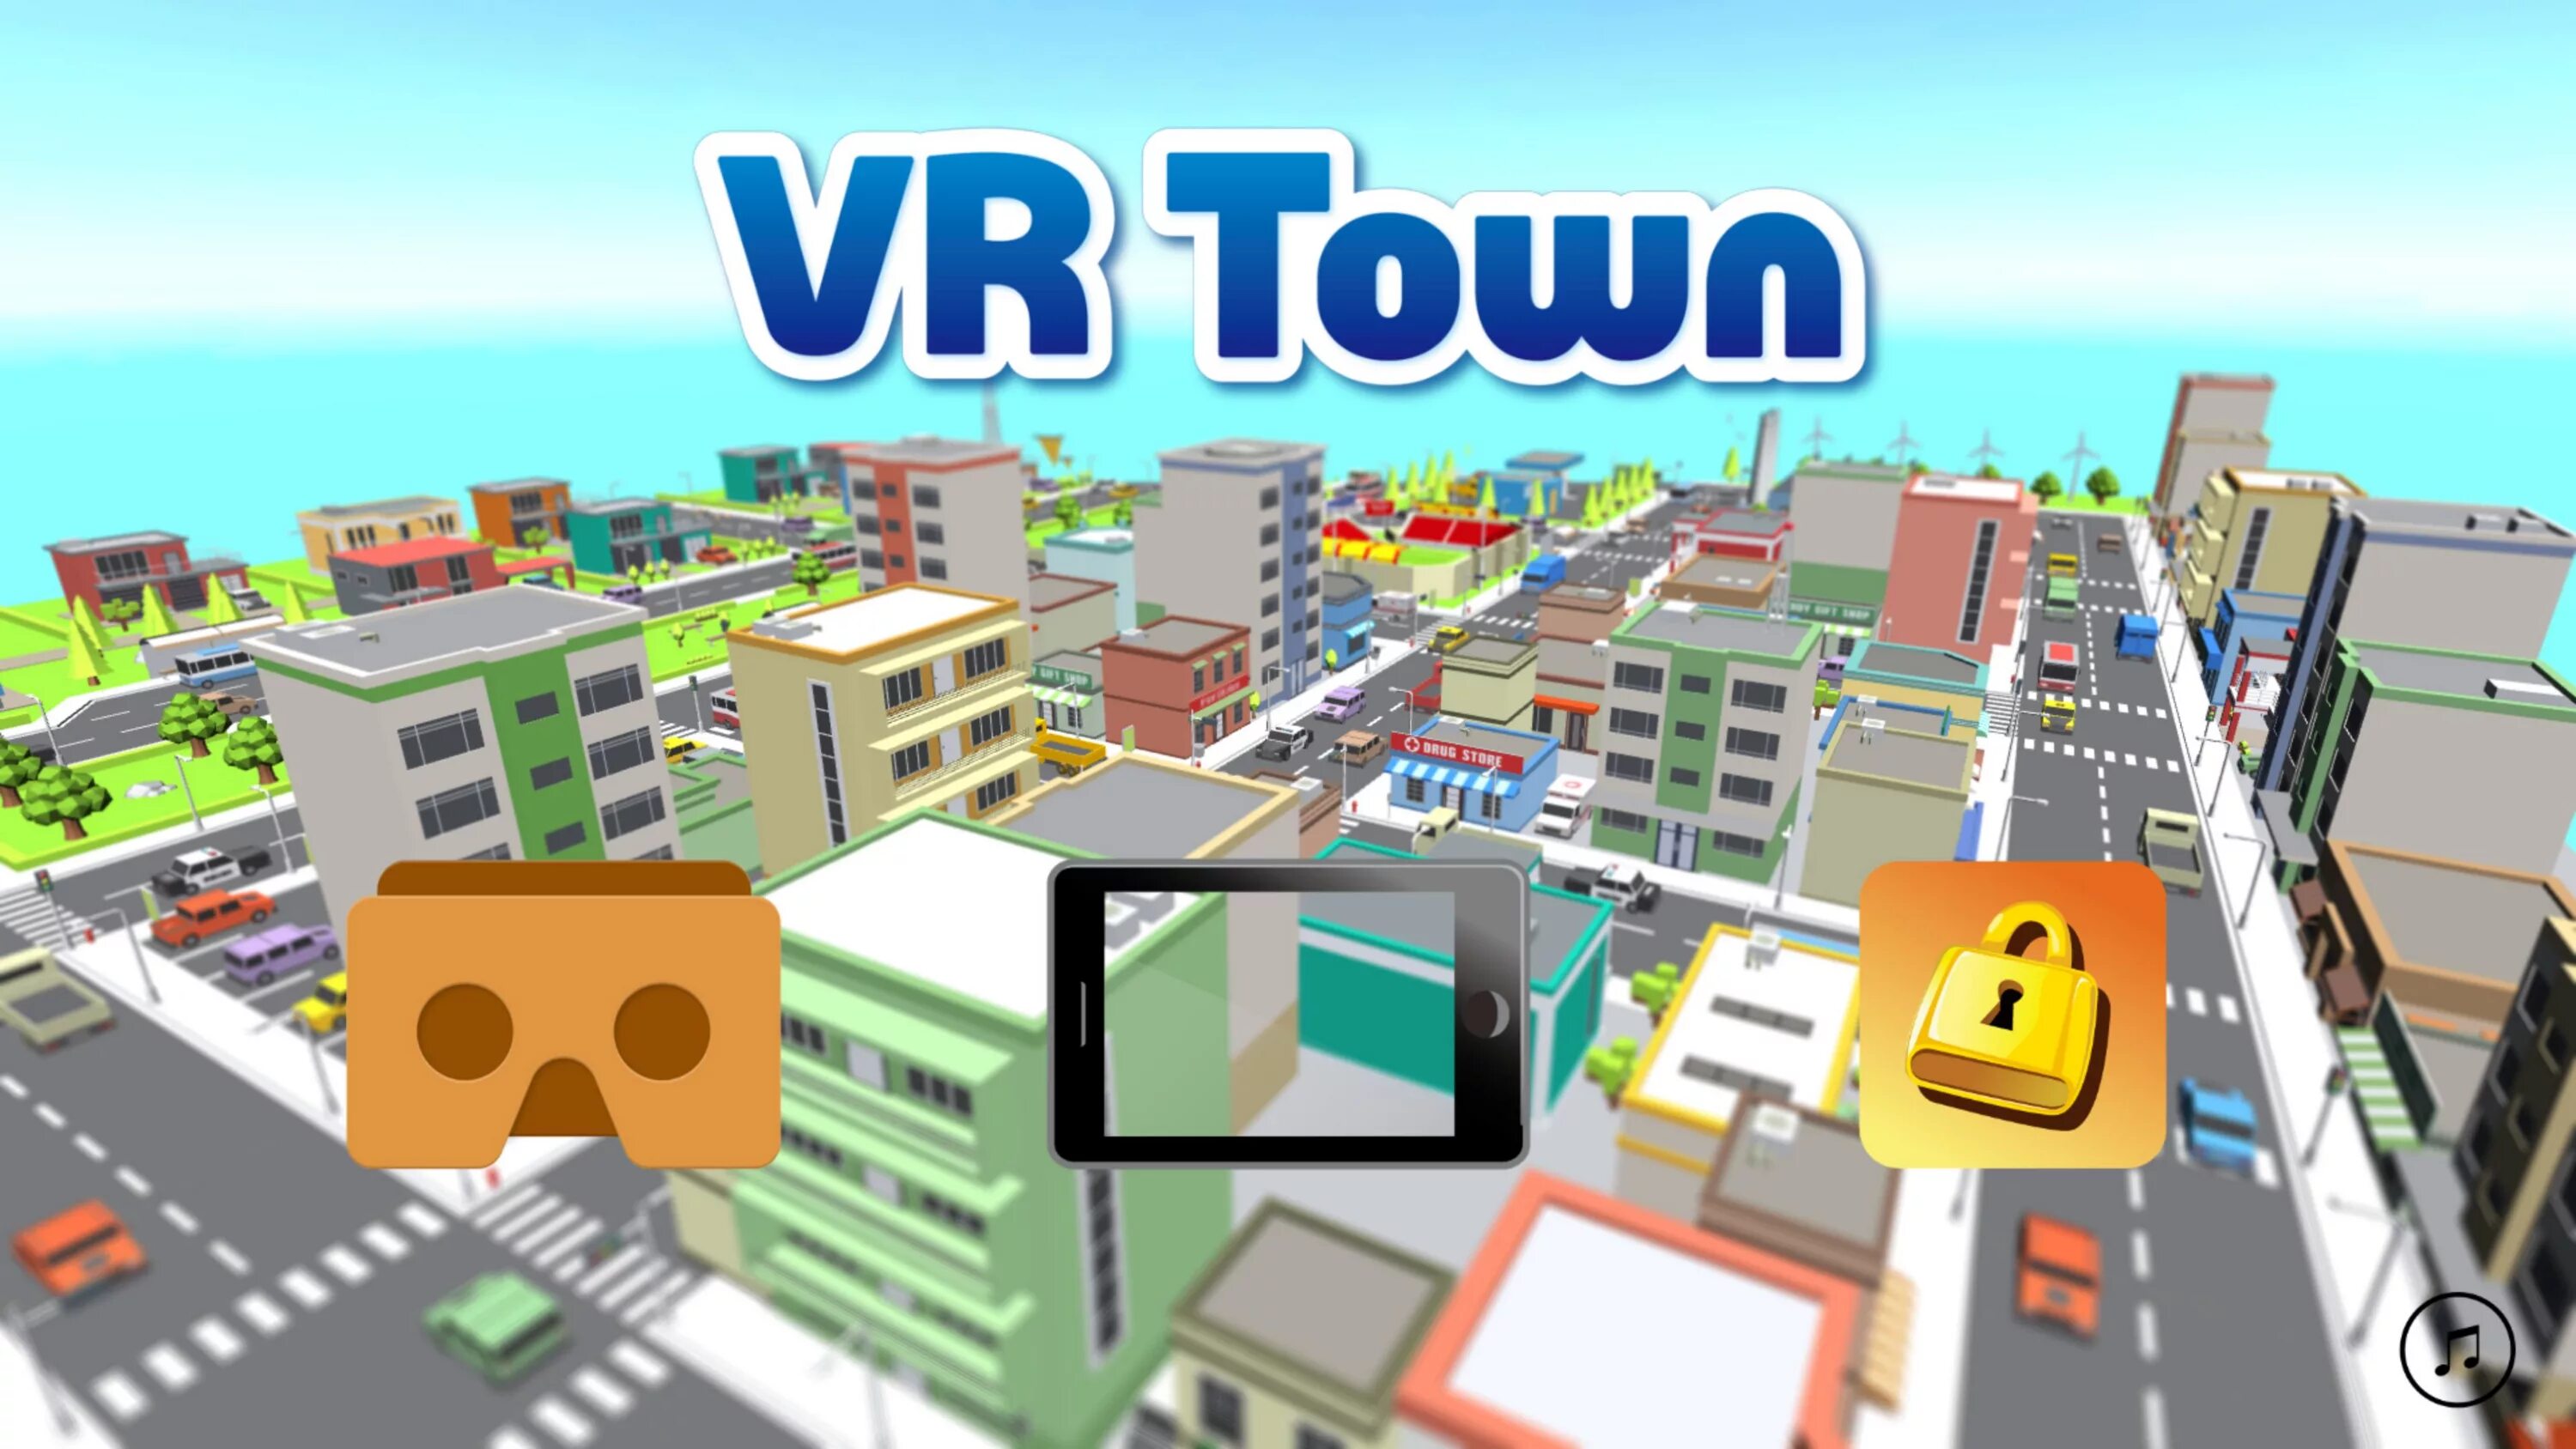 Vr город. VR Town. Виртуальный город в ВР. VR город мечты. Town.